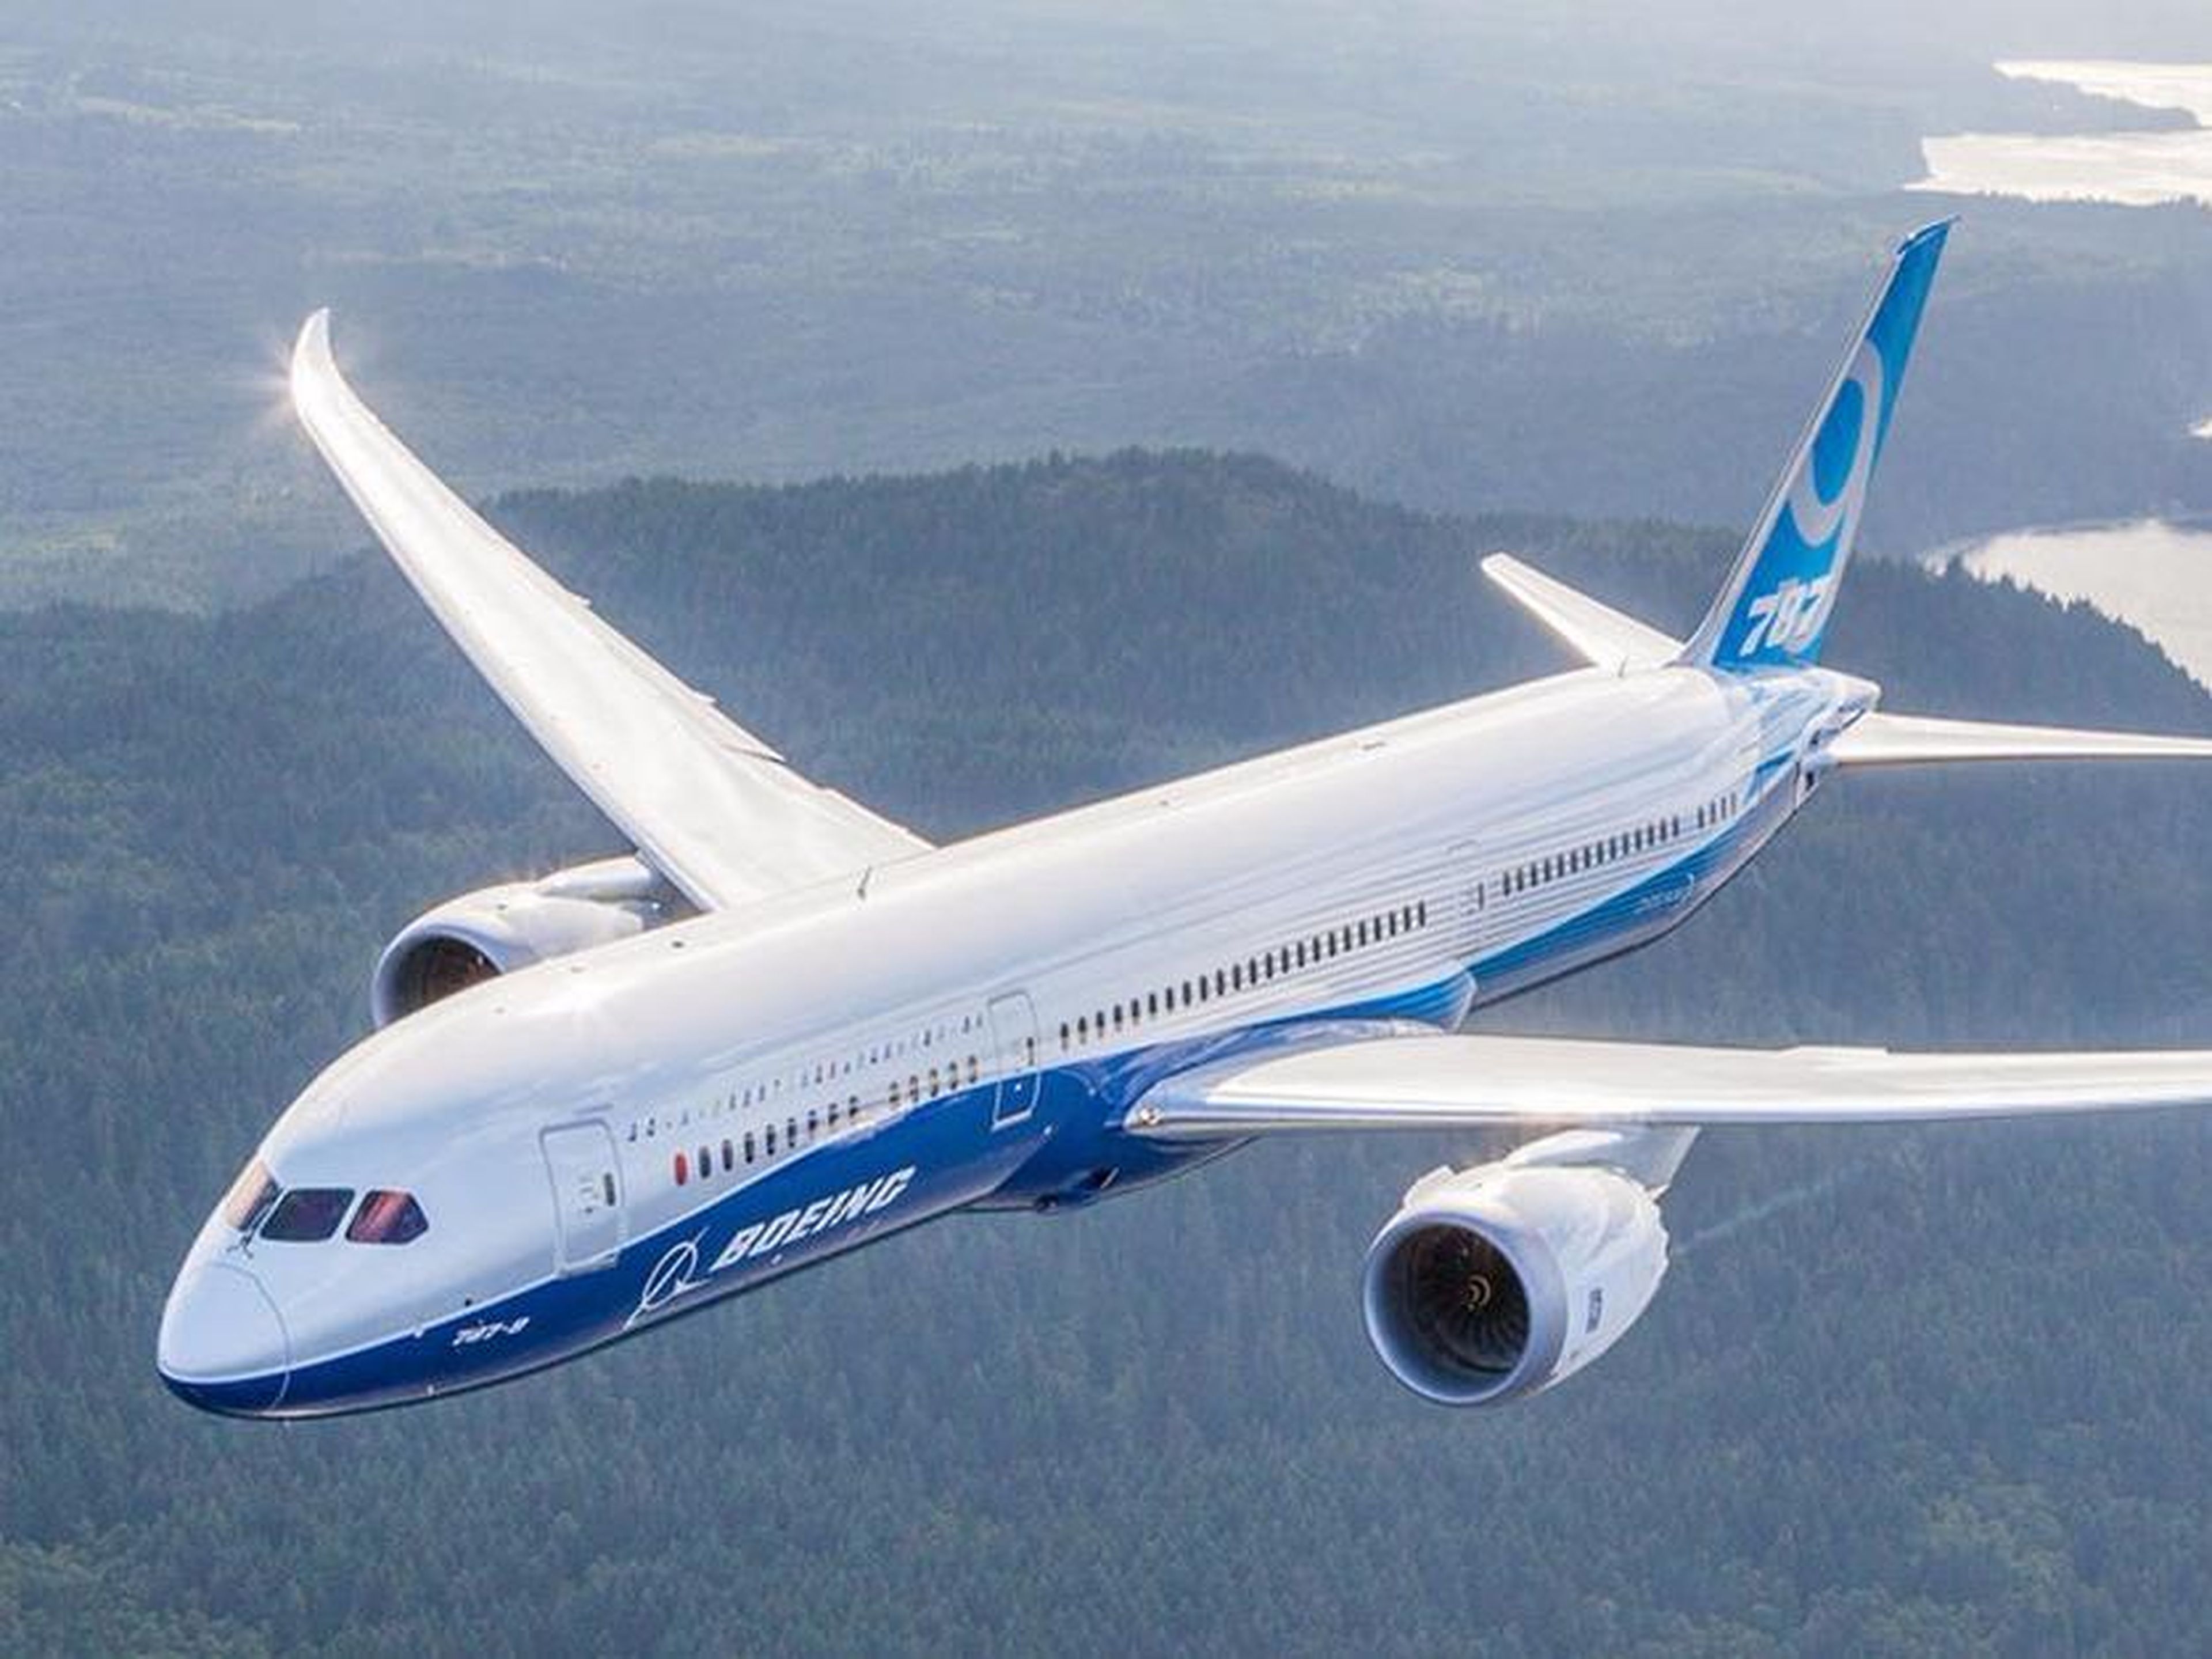 The Boeing 787-8 Dreamliner was the first in a new generation of ultra-fuel-efficient wide-body airliners.